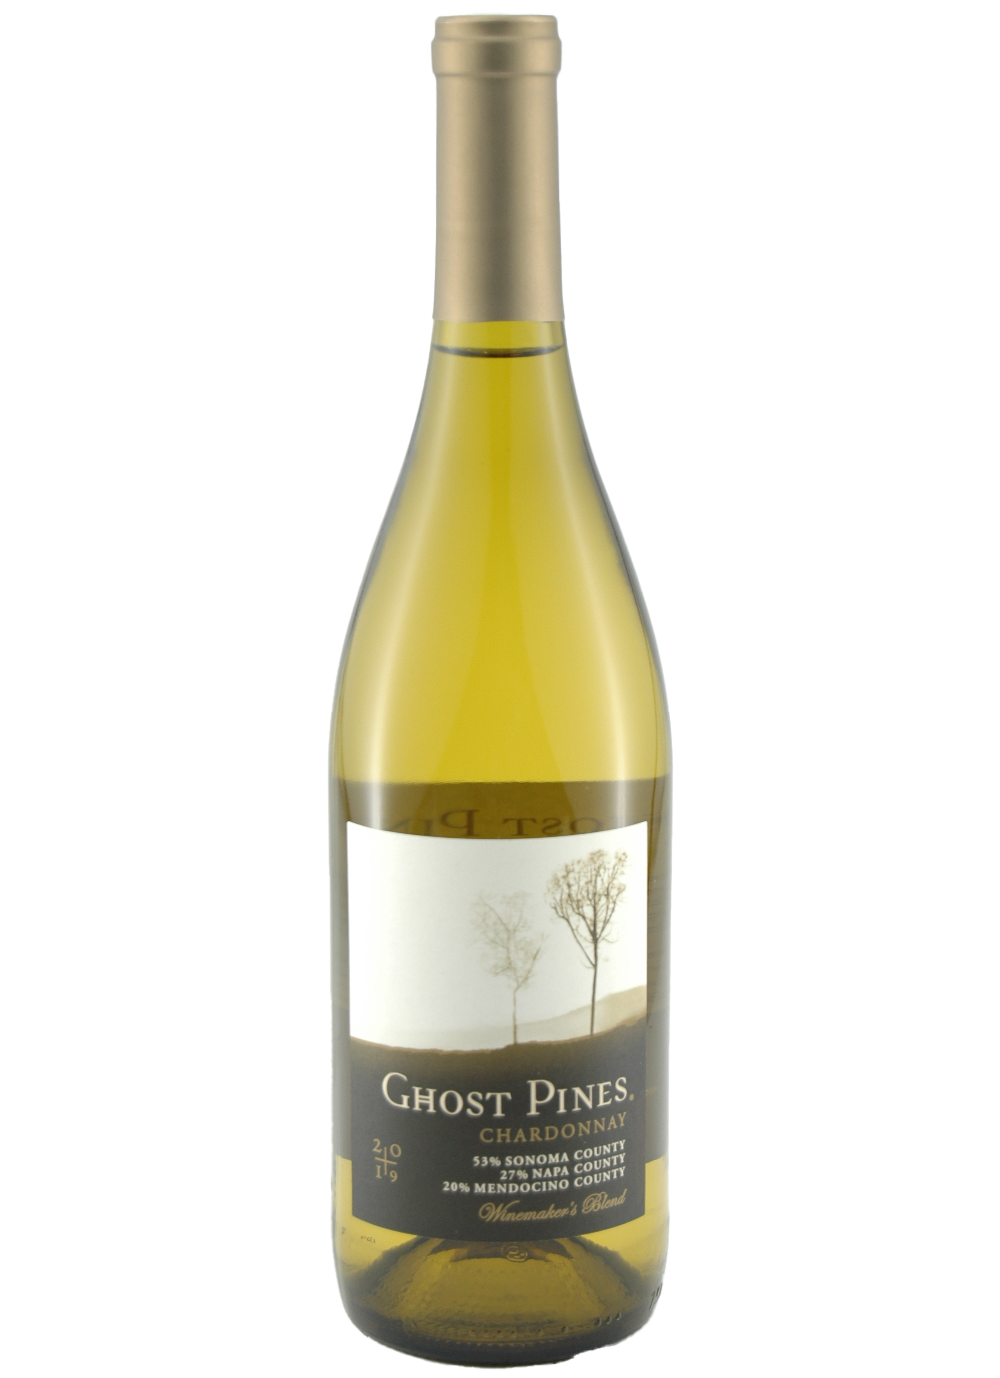 Ghost Pines by L.M. Martini Chardonnay